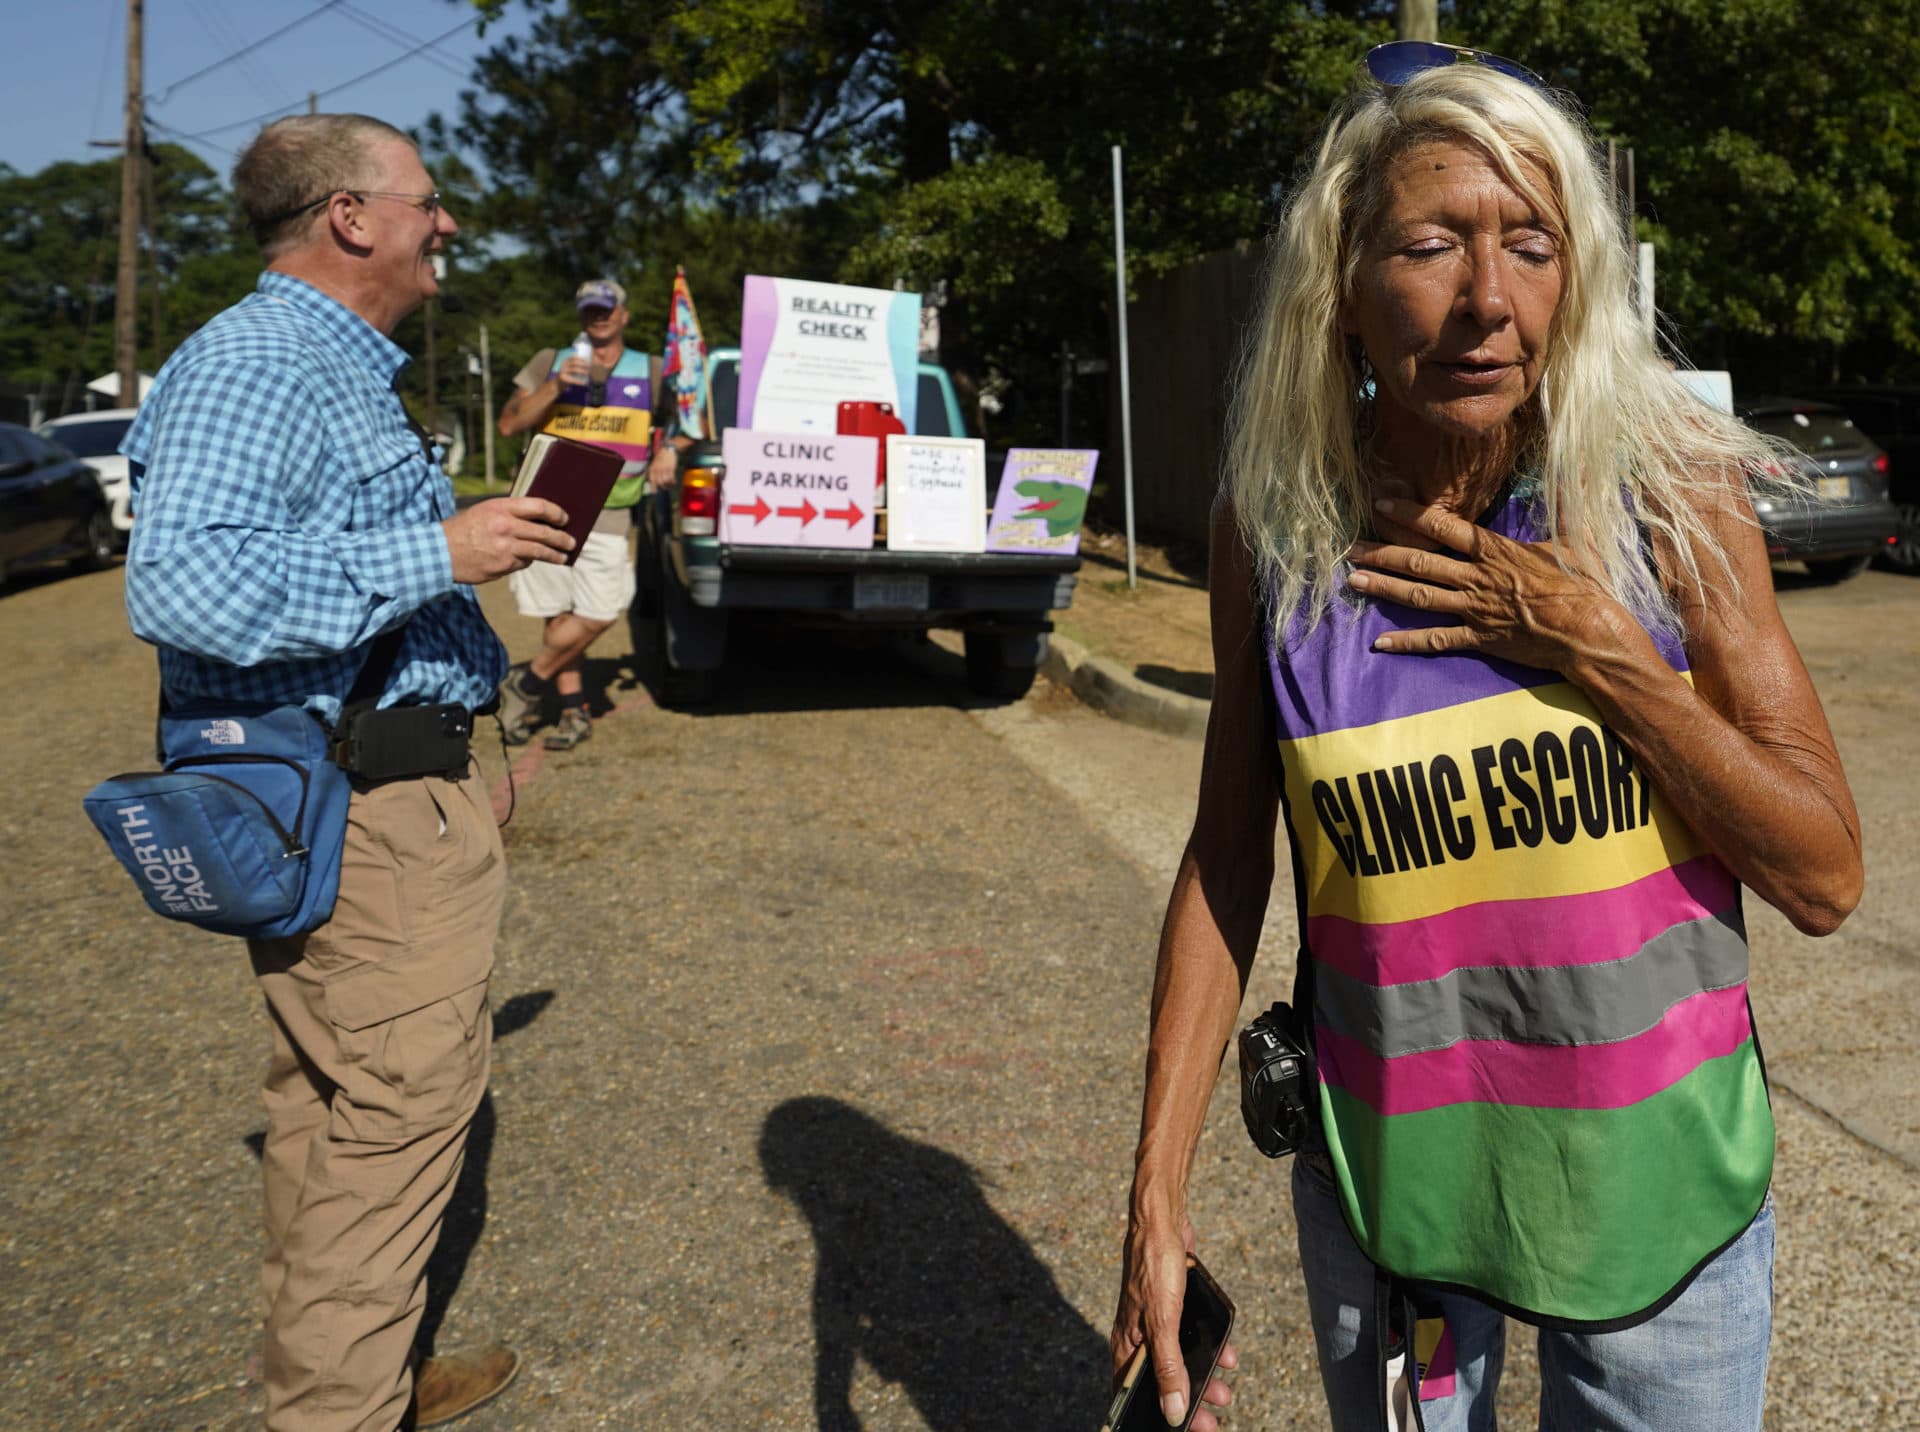 Veteran Pink House defender Derenda Hancock reacts to anti-abortion activist Coleman Boyd's protesting outside the Jackson Women's Health Organization clinic in Jackson, Mississippi moments before the U.S. Supreme Court ruling overturning Roe v. Wade was issued Friday morning. The clinic is the only facility that performs abortions in the state. (Rogelio V. Solis/AP)